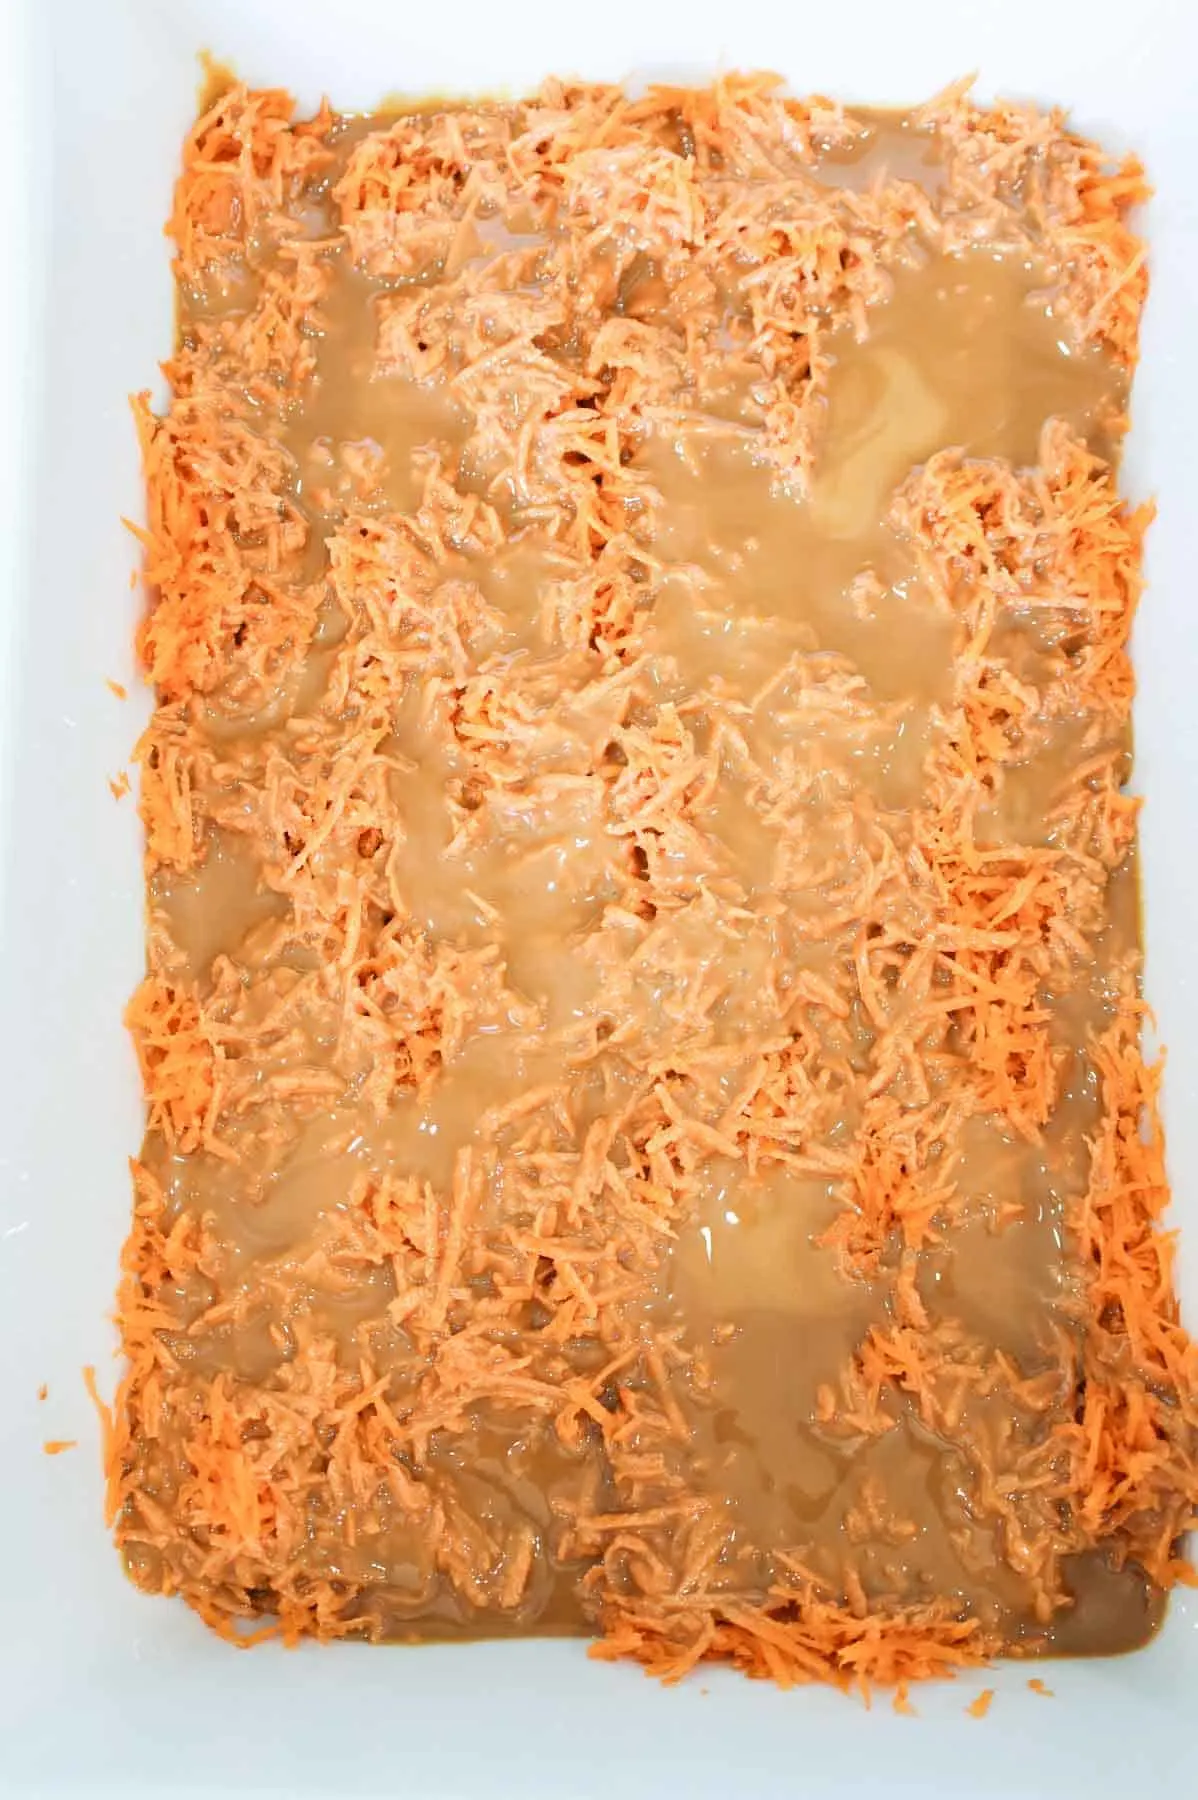 dulce de leche poured over grated carrot in a baking dish